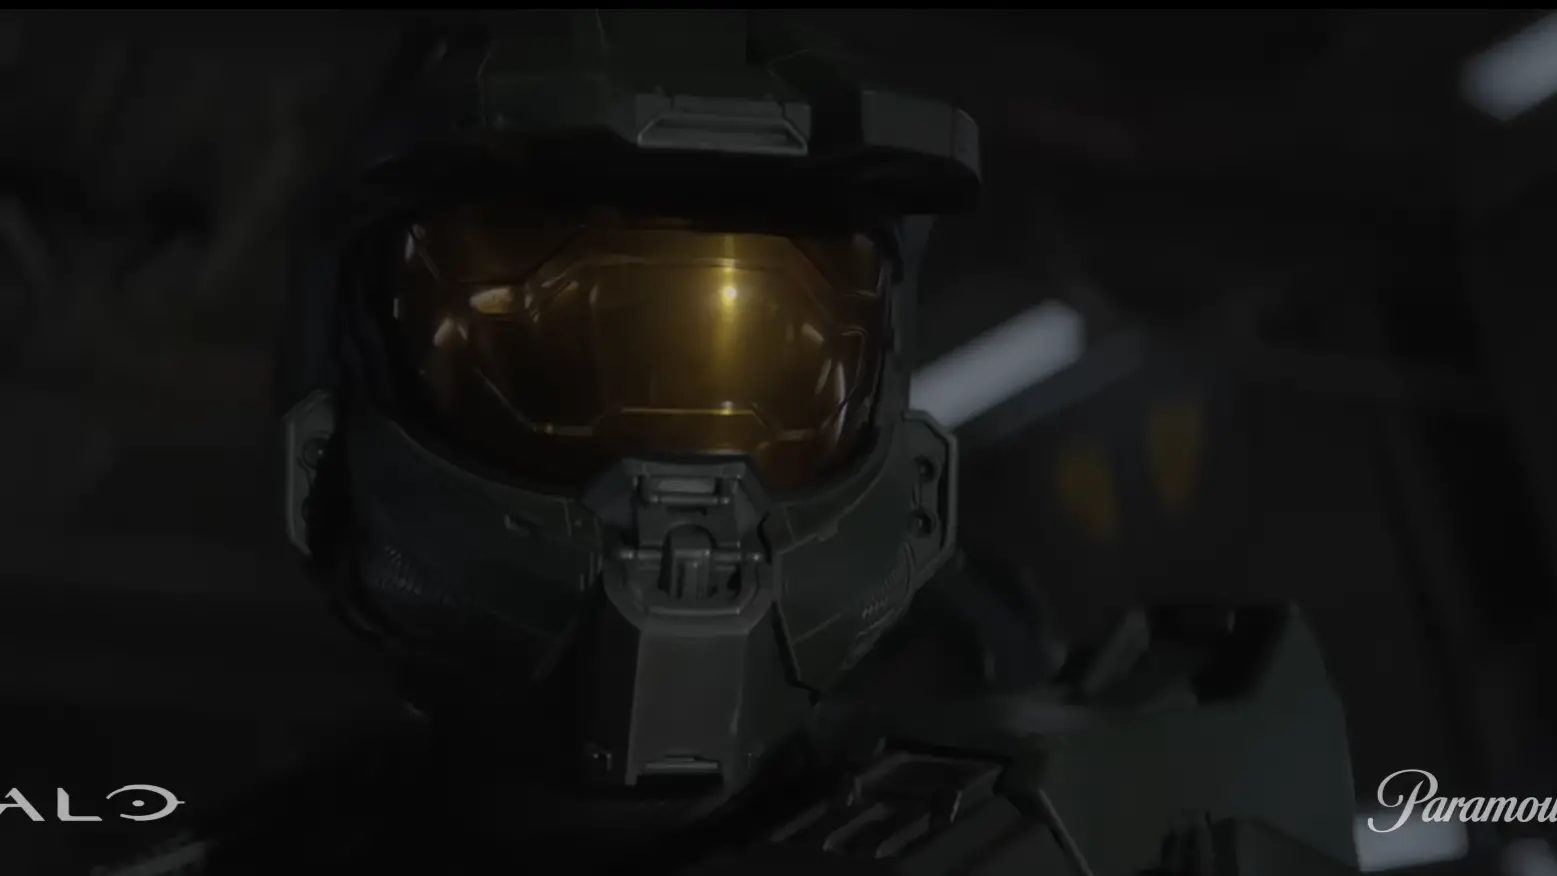 Halo The Series Season 2 Reveals New Official Trailer - Noisy Pixel